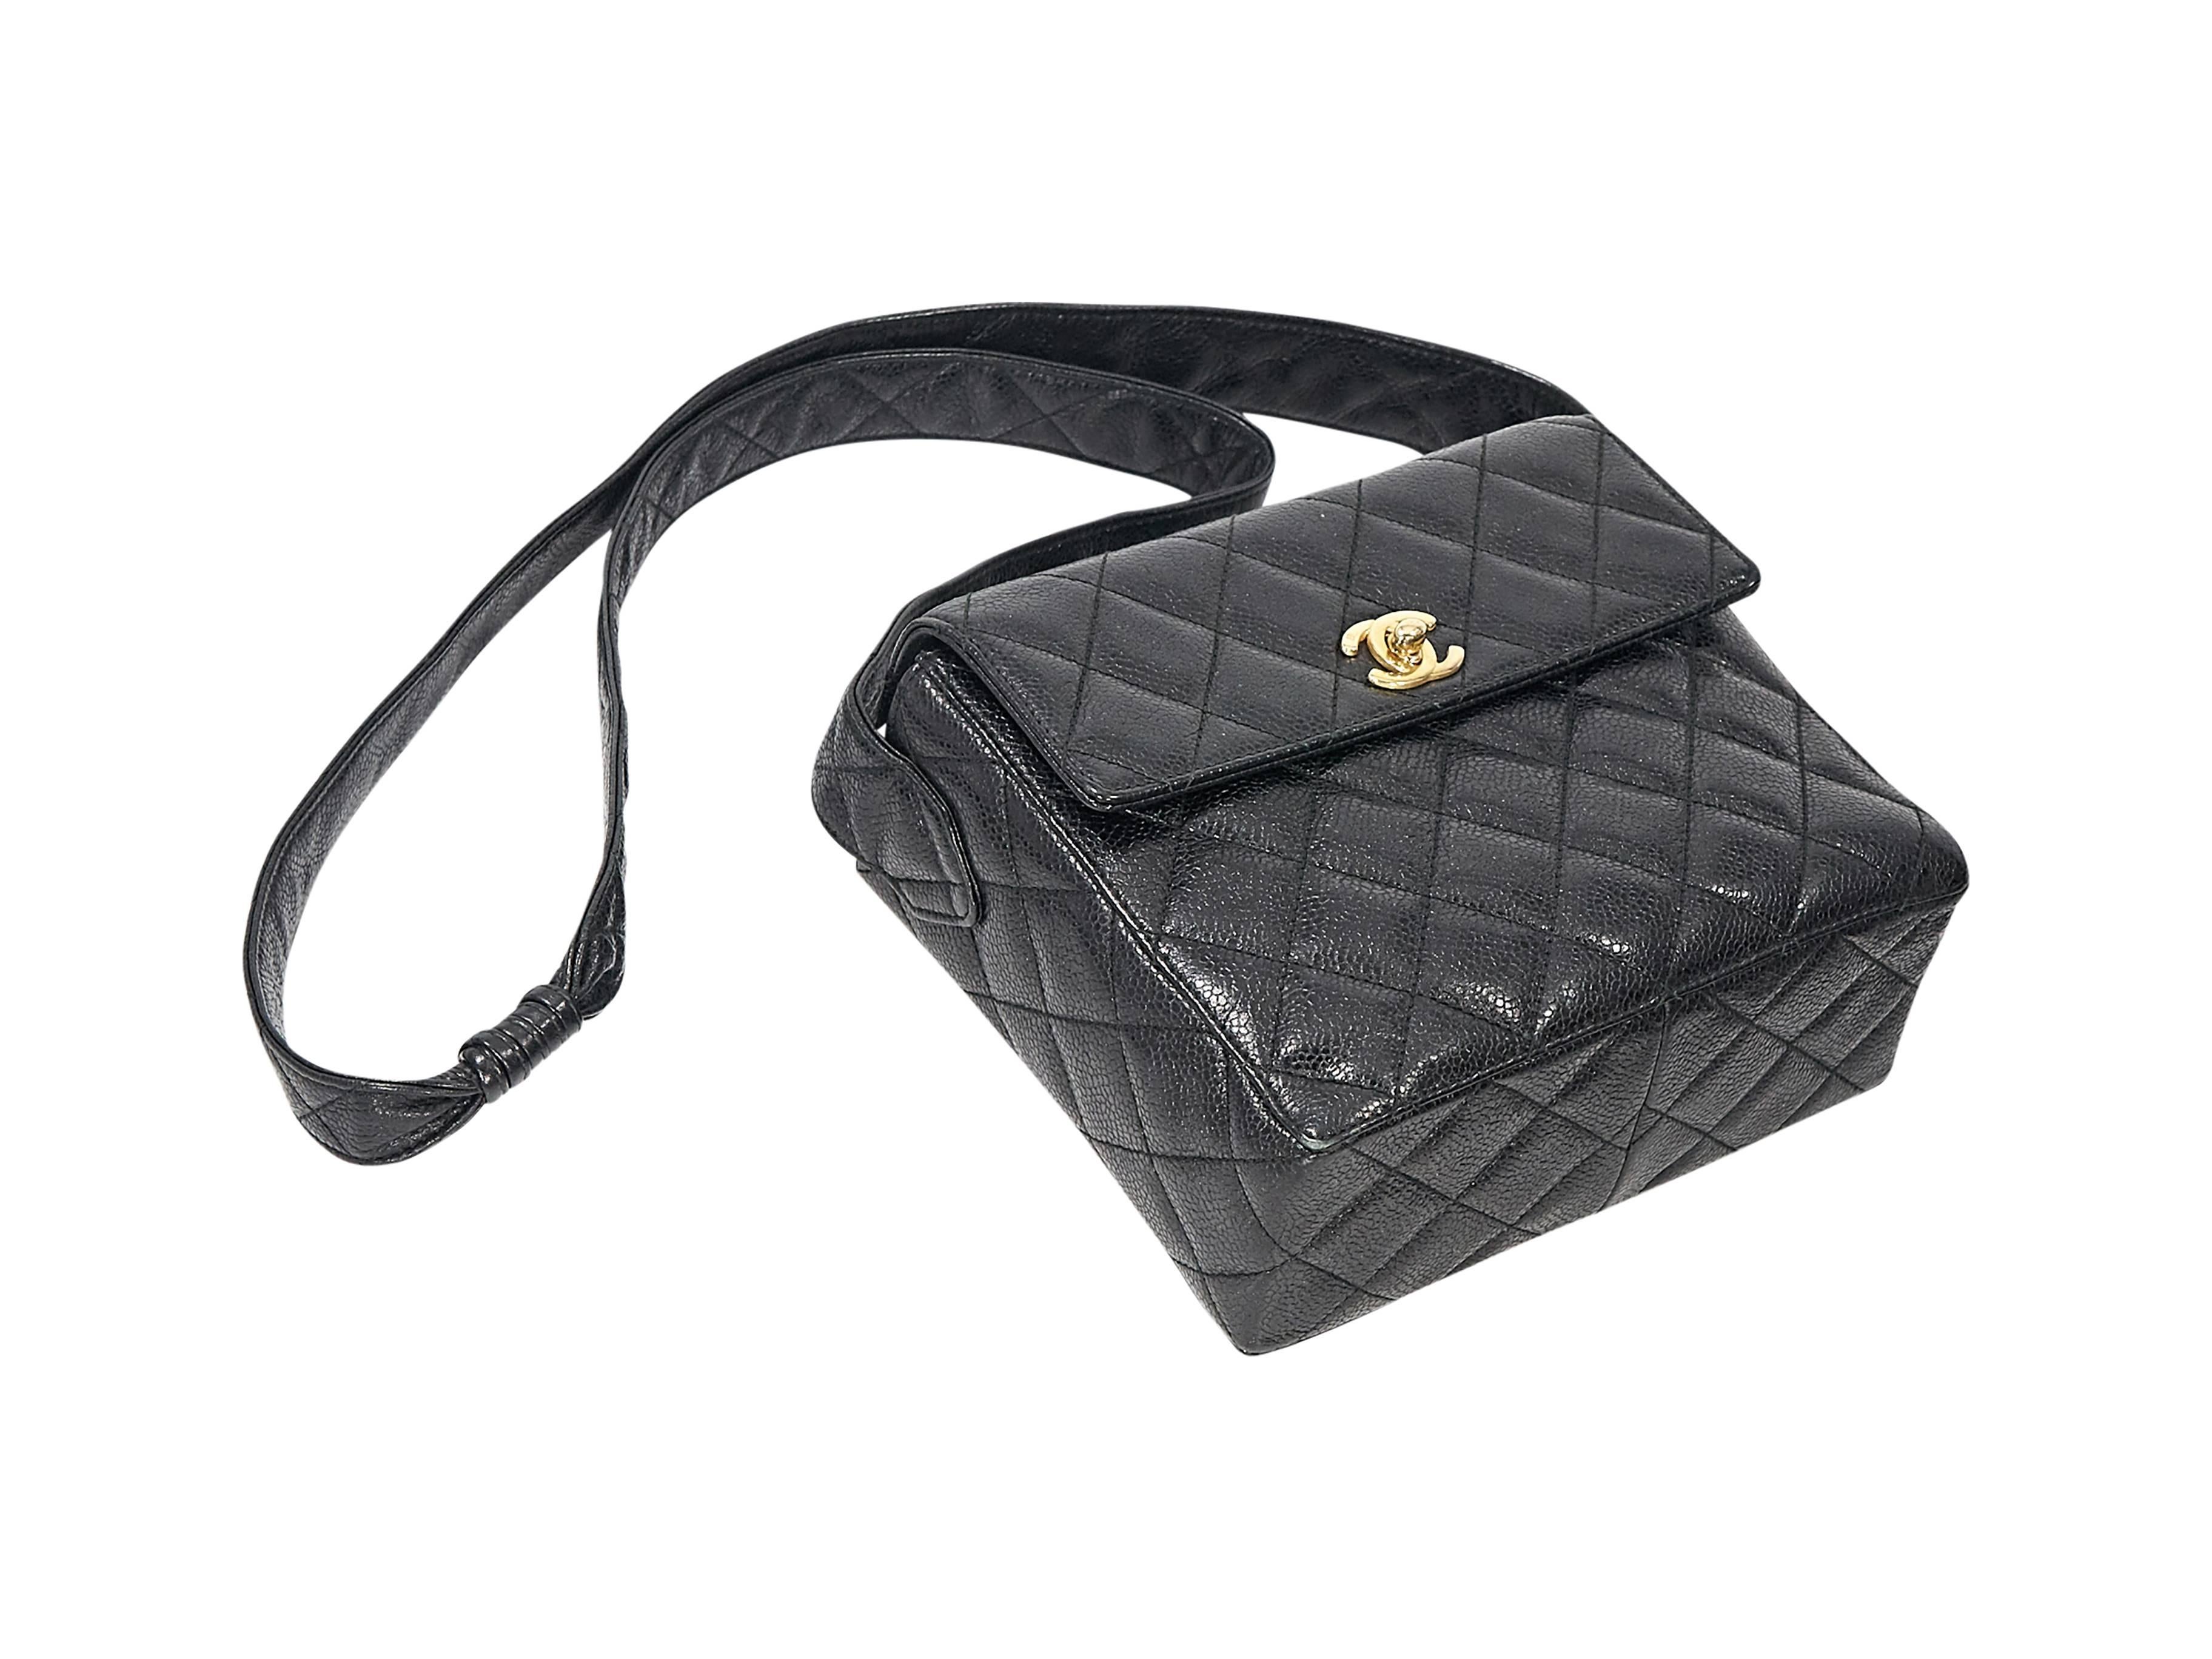 Product details: Black caviar leather quilted crossbody bag by Chanel. Crossbody stap. Twist-lock closure on front flap. Leather lined interior with inner mirror, slide and zip pockets. Back exterior slide pocket. Goldtone hardware. Authenticity